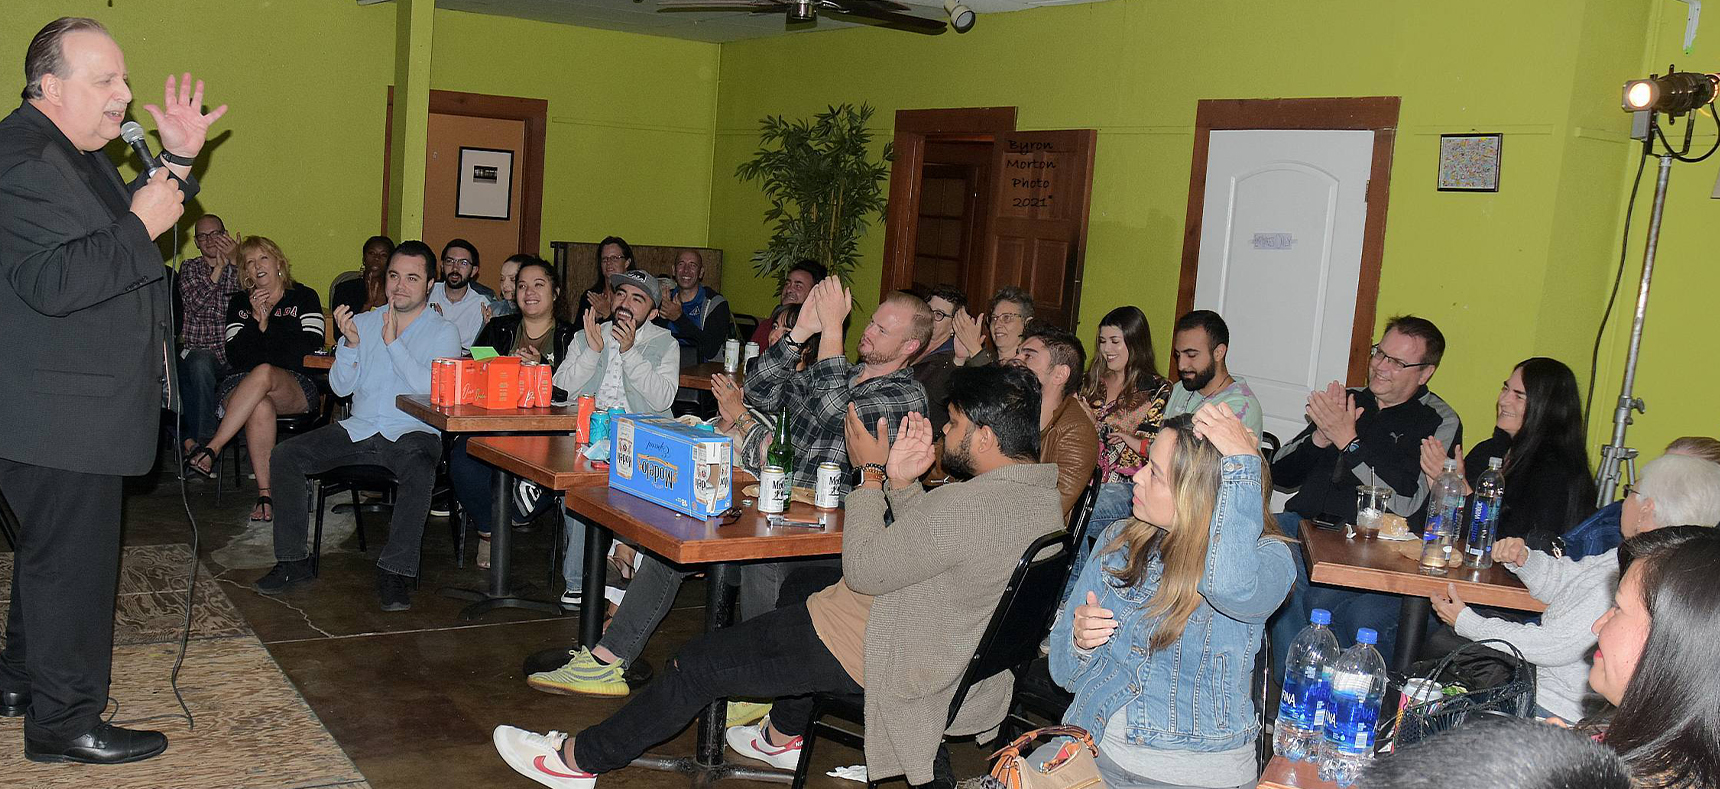 Comedy Heights was back with a bang at Twiggs Saturday night.